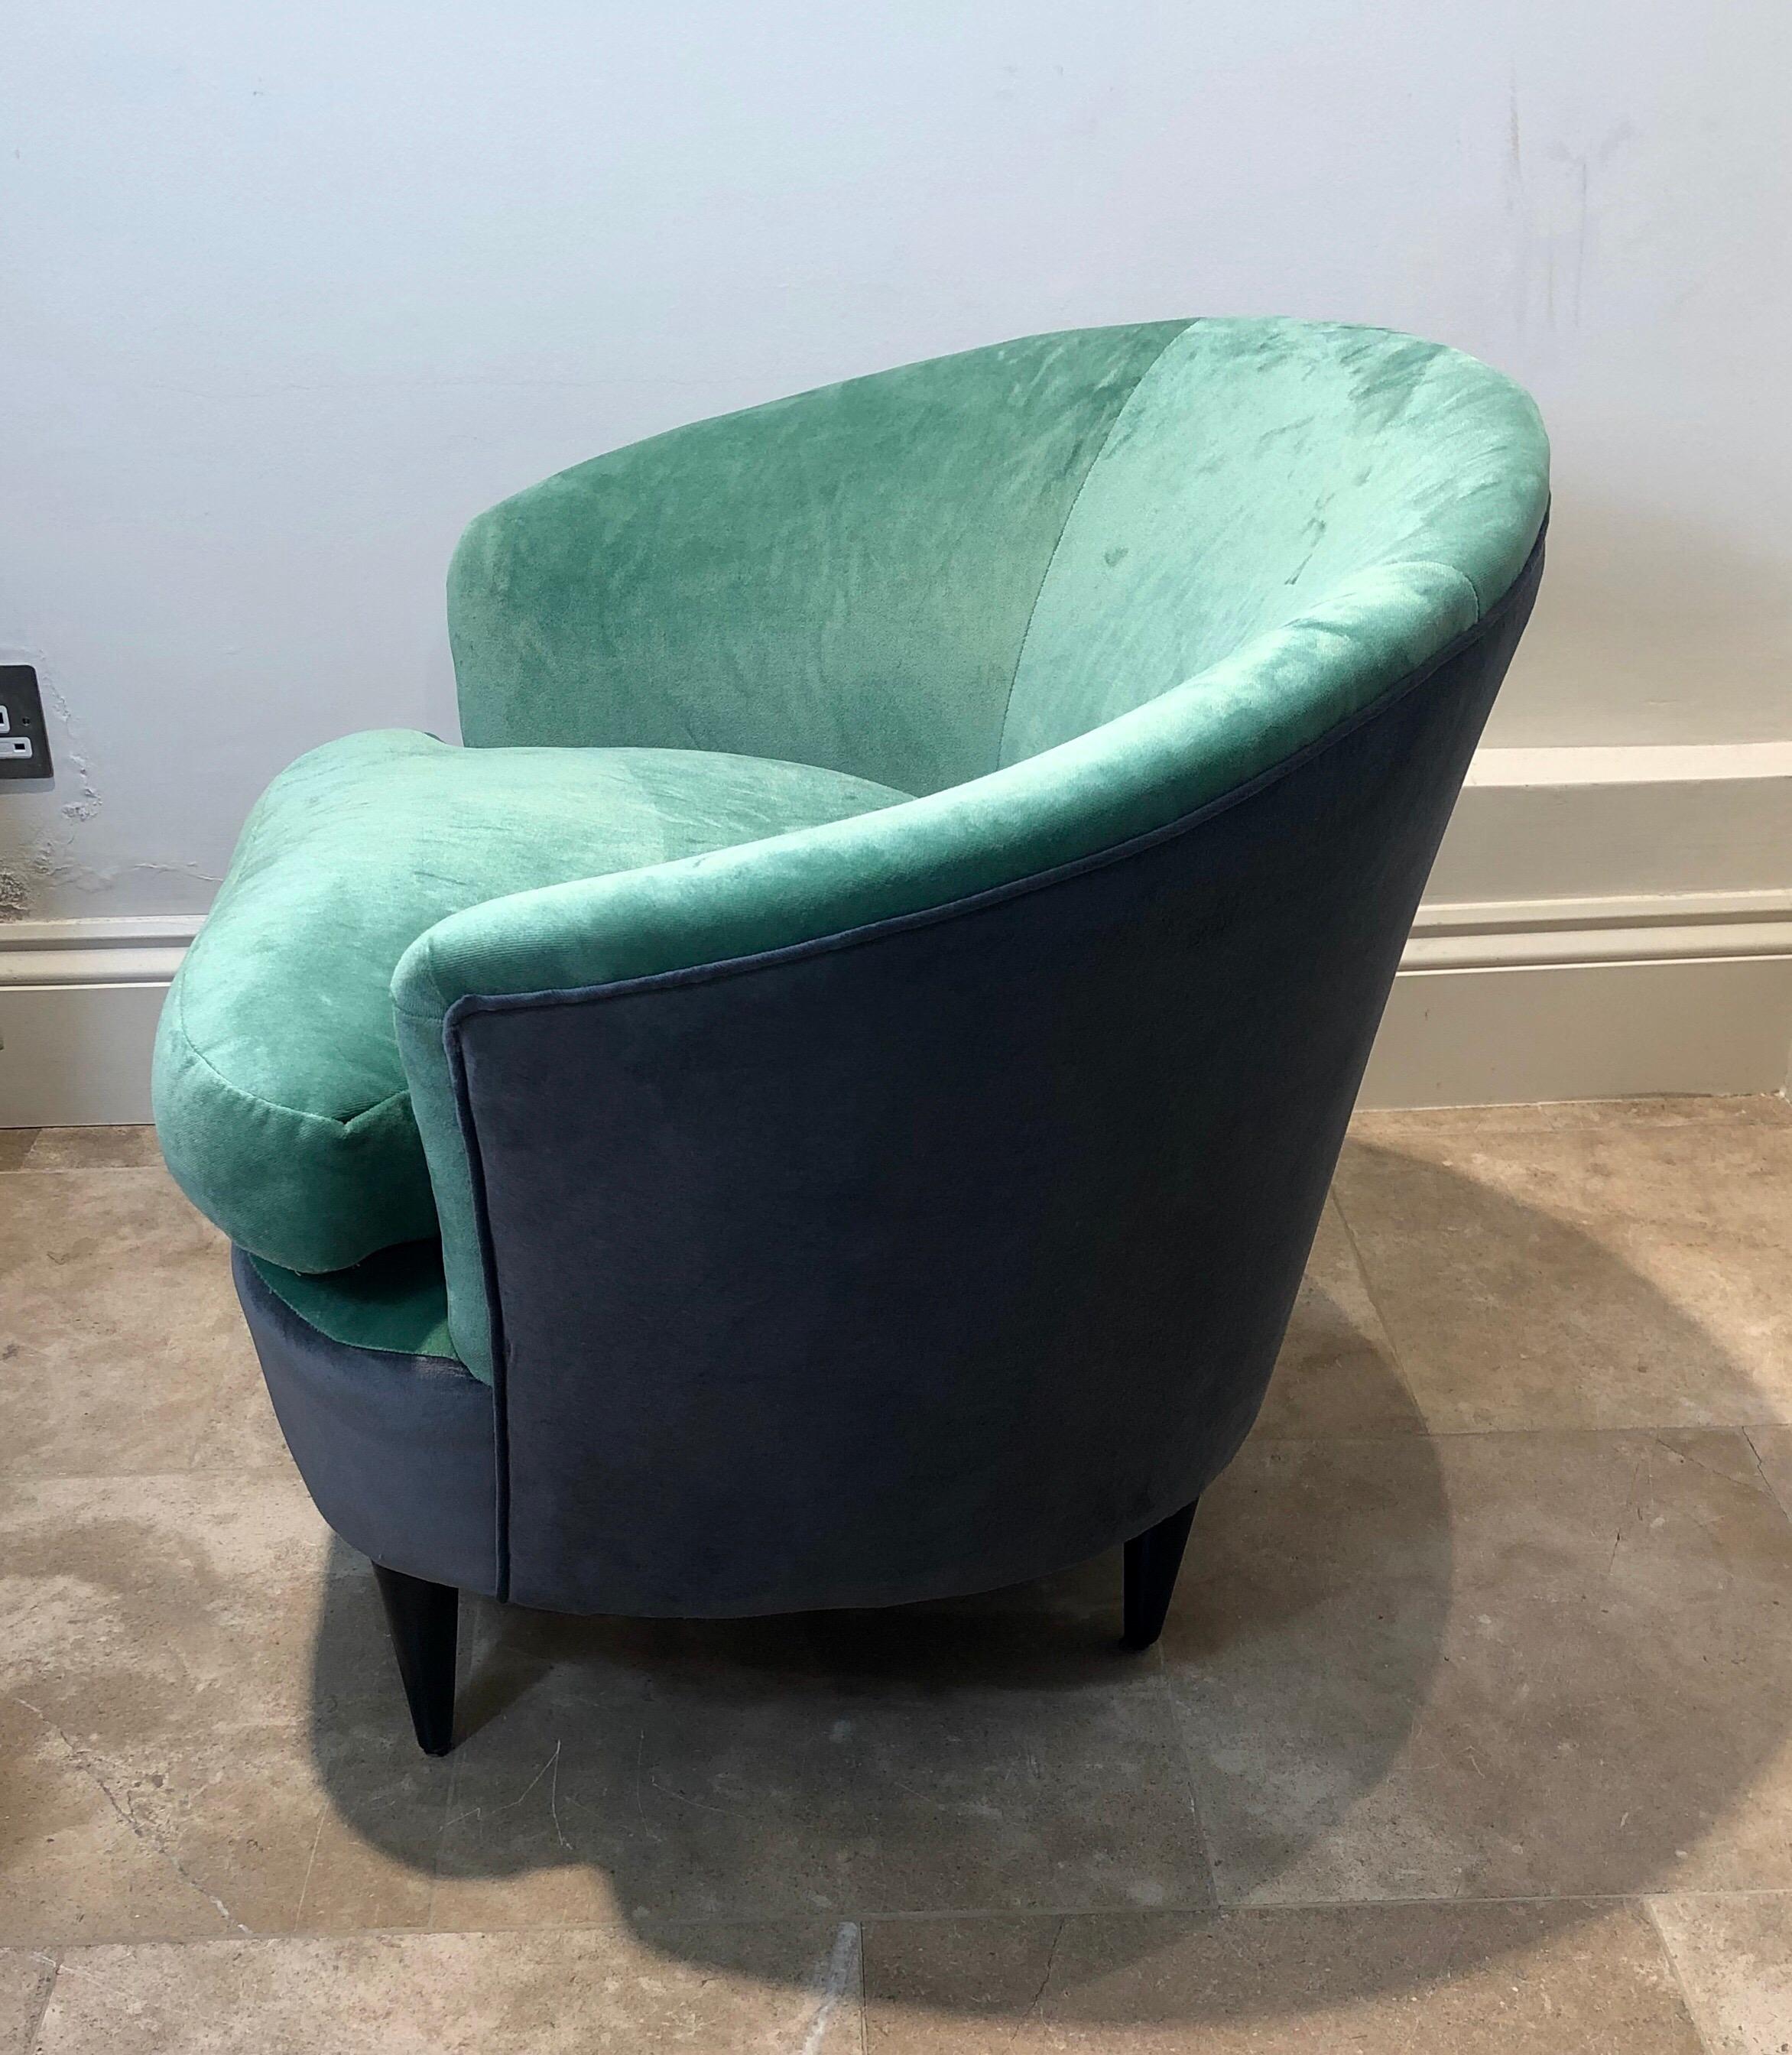 20th Century Pair of Italian Curved Chairs and Stools with Mint Green and Grey Upholstery For Sale